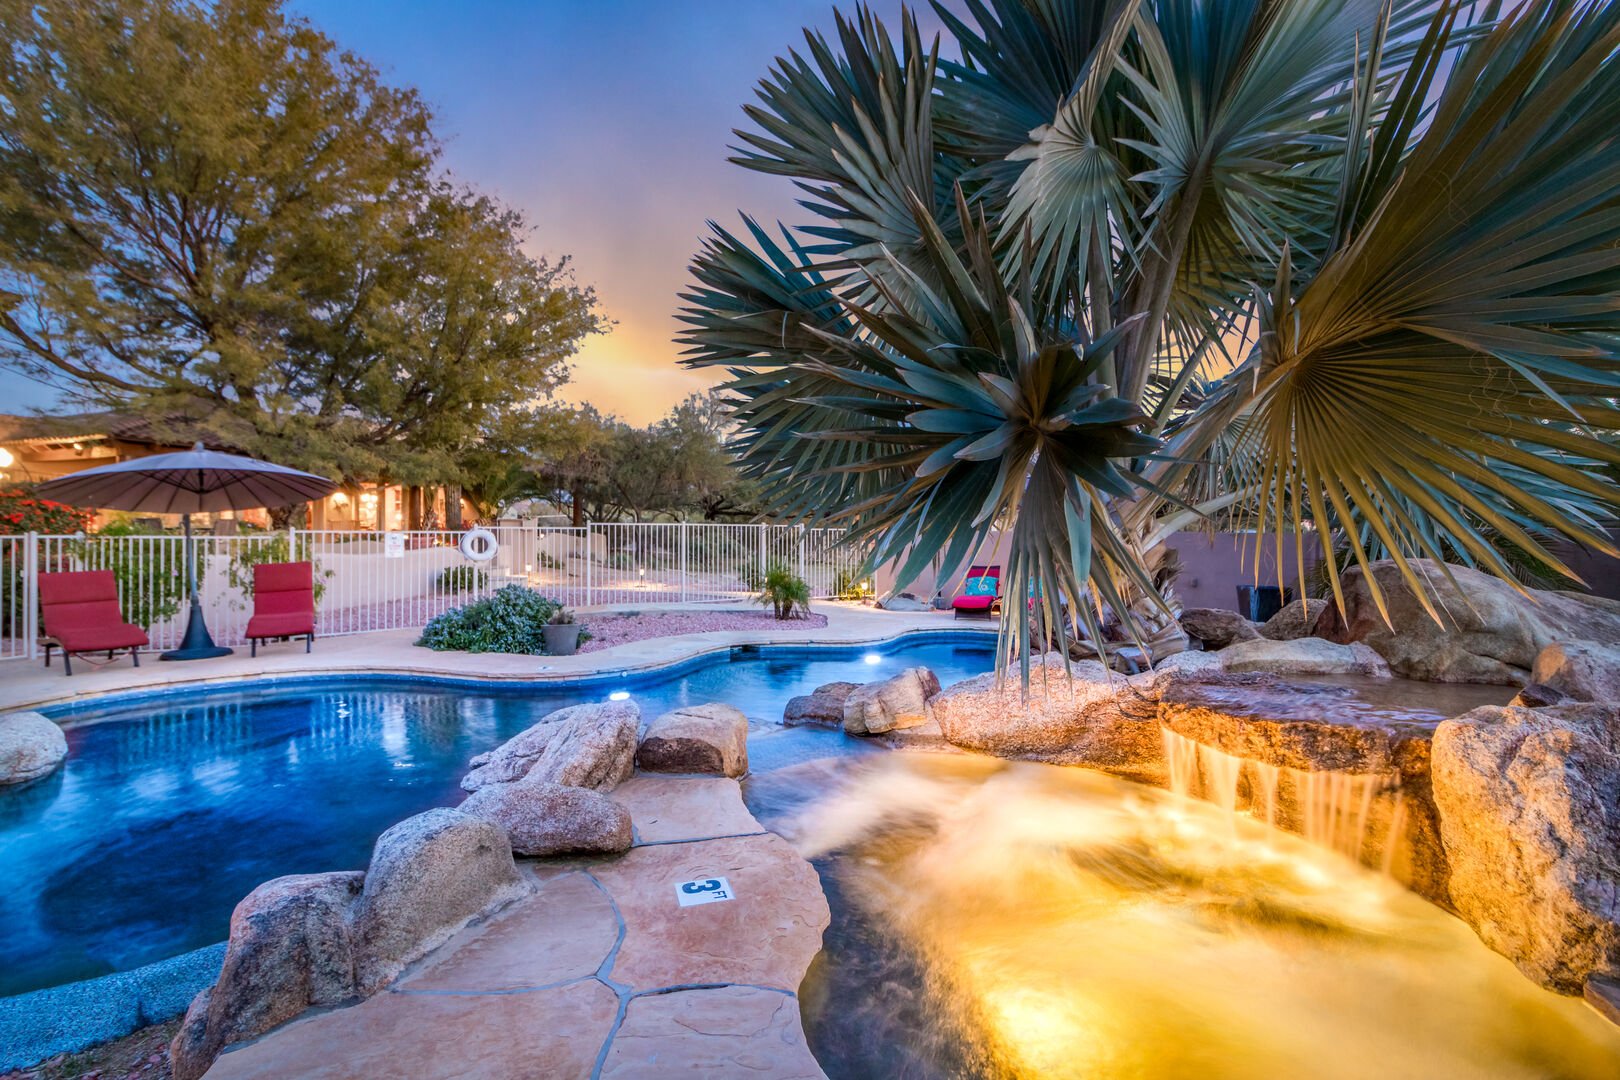 Experience bliss in our desert oasis, complete with a pool, soothing spa, and comfortable seating. Nature's sanctuary awaits.  ‍♂️  #OasisGetaway